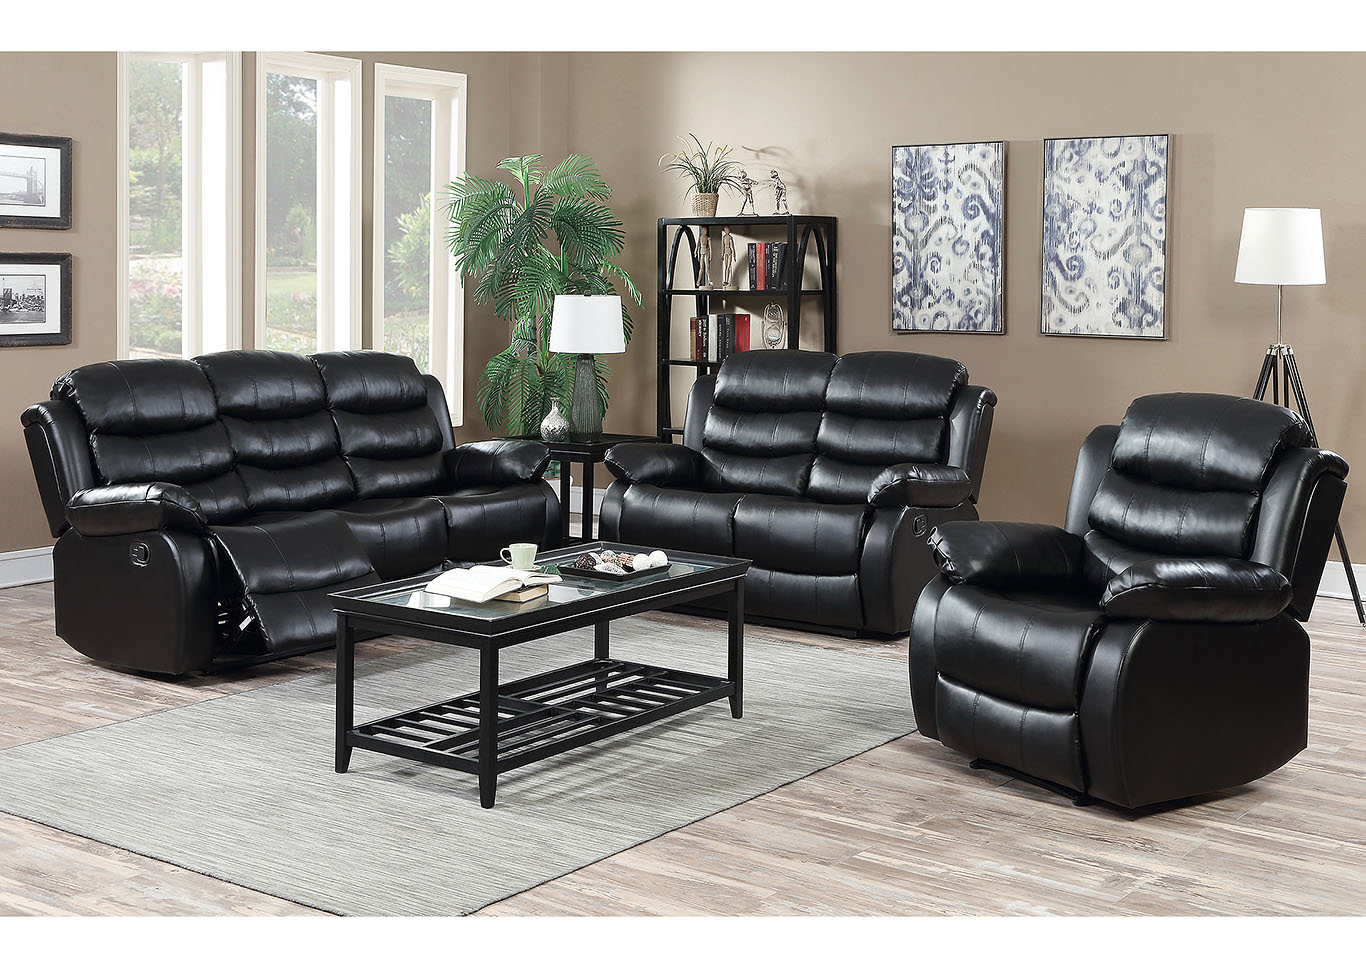 U9600 Black Faux Leather Recliner,Global Trading